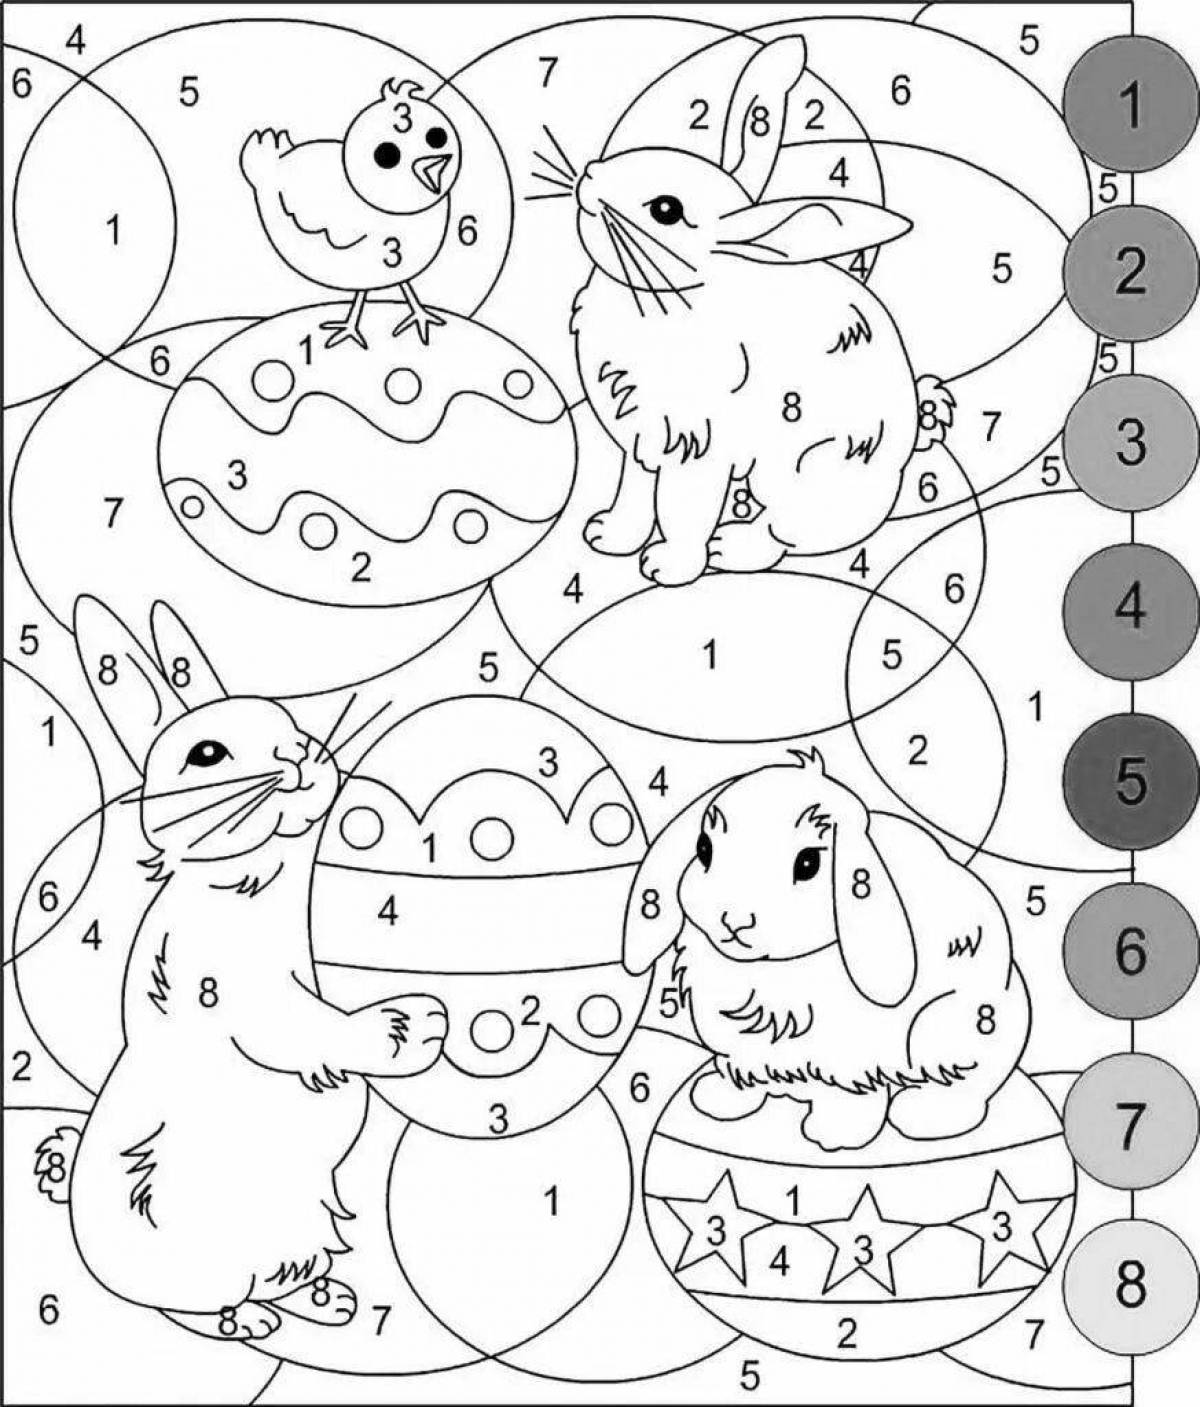 Entertaining coloring book color by number